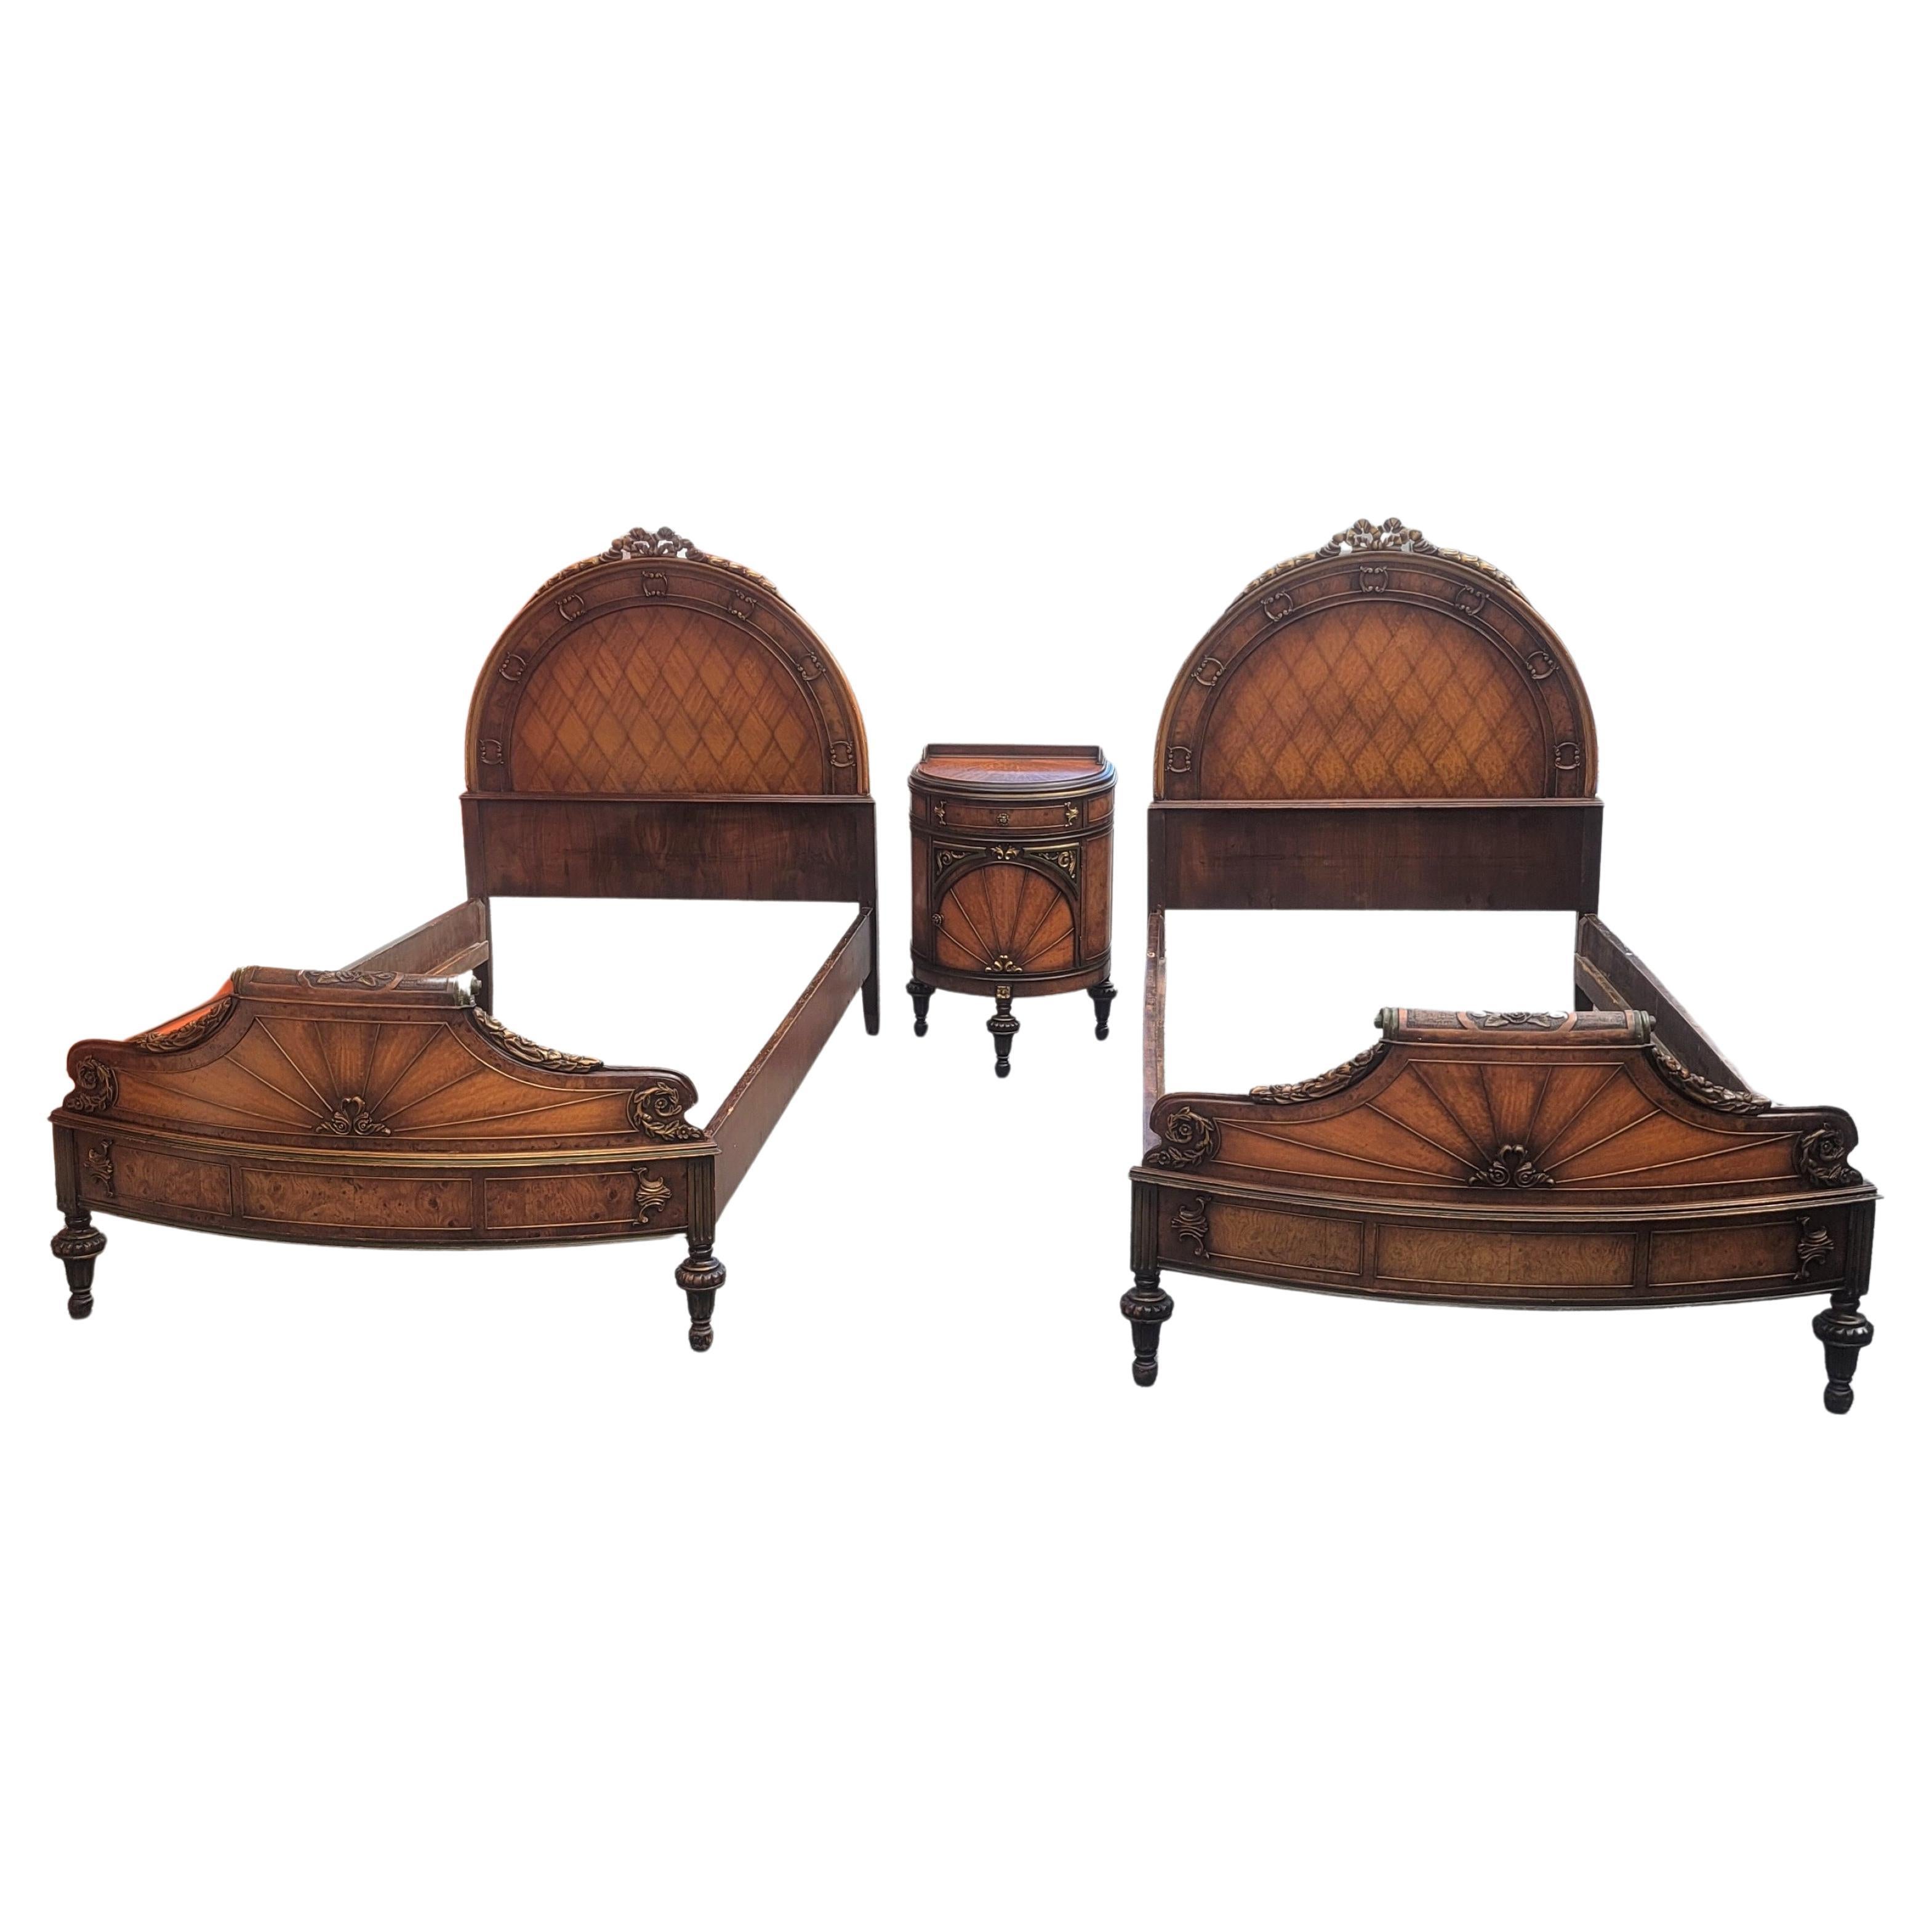 A very rare Early 1900s William & Mary Parcel Gilt Twin Bedroom Set. Made out of walnut, kingwood, book matched burl veneer. 
Set includes:
-2 Single beds with amazing real wood carvings and gilts on the headboard as well the footboard Measuring